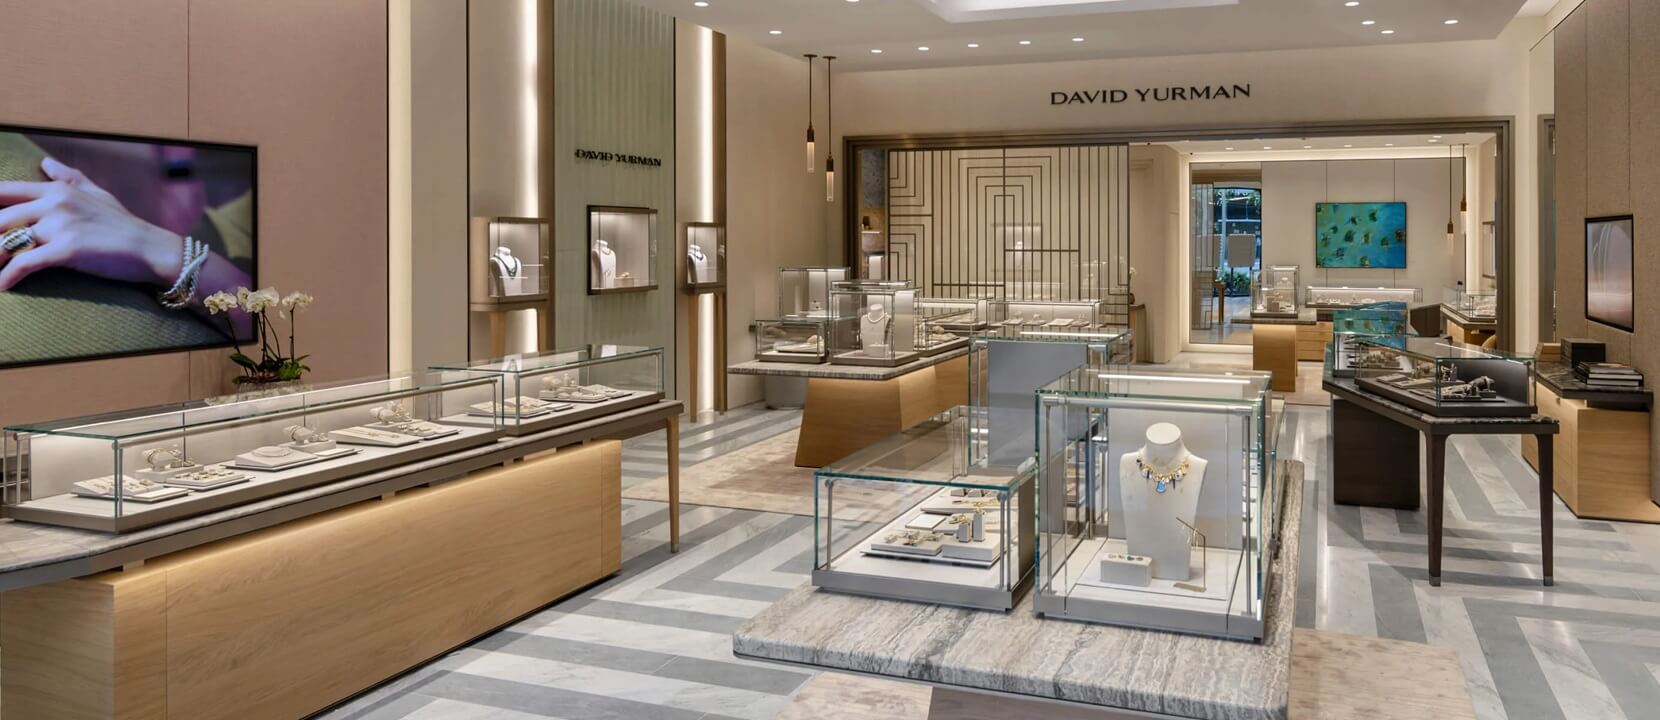 Nationwide Fixture Installations David Yurman Case Study Jewelry and Watches Millwork Packages New Store Installation Maintenance